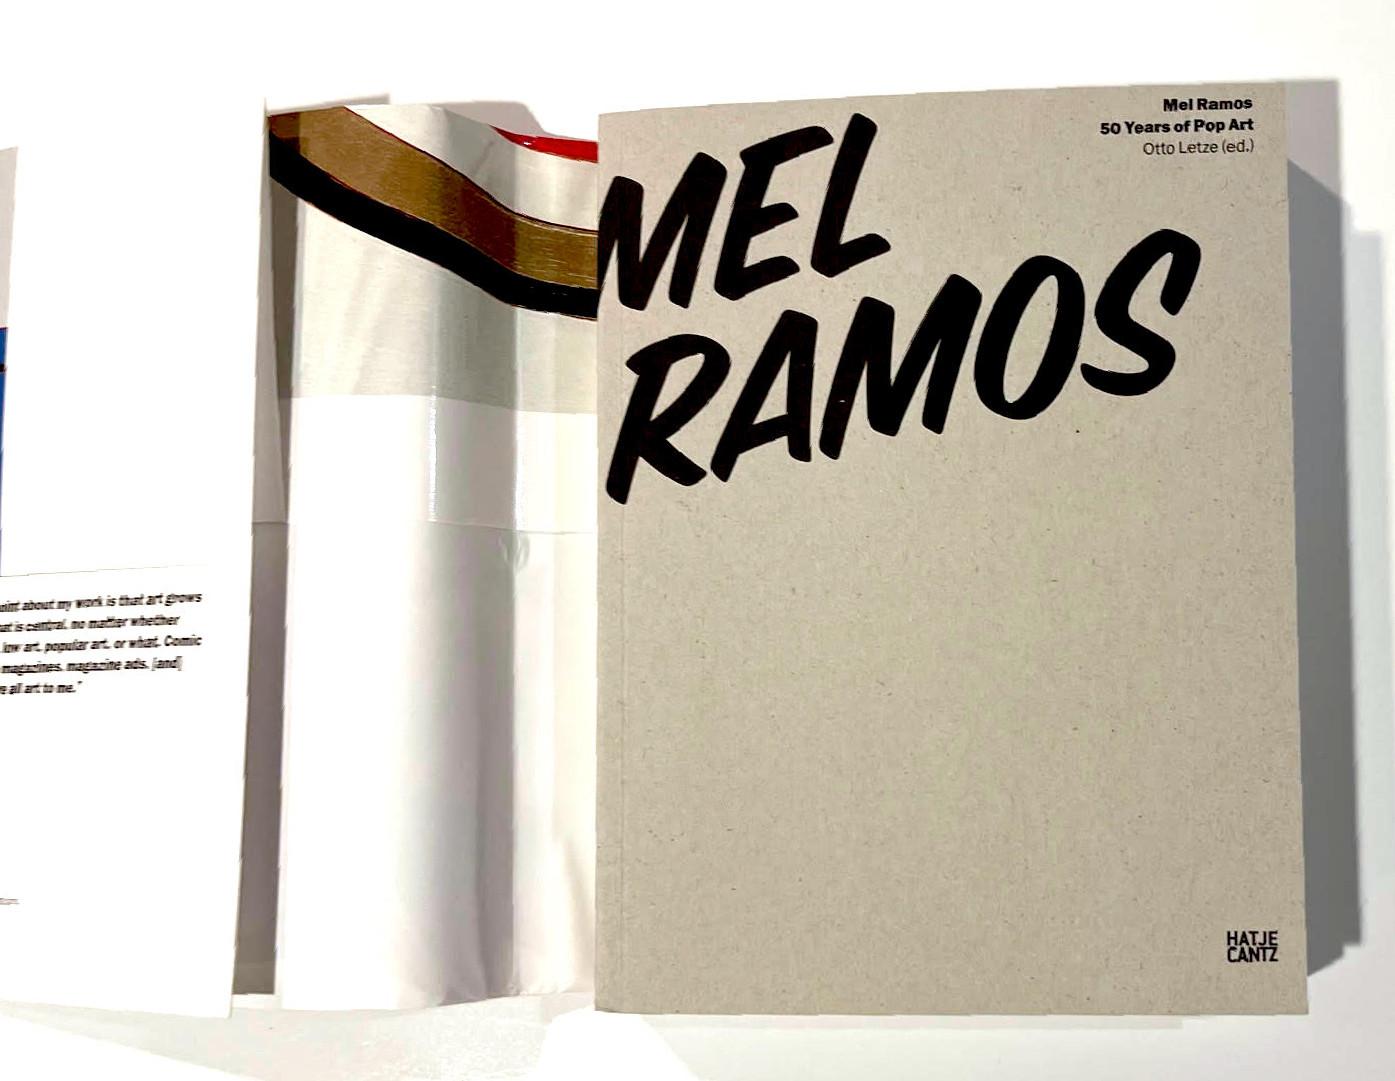 Mel Ramos 50 Years of Pop Art Book (signed, dated and inscribed by Mel Ramos) For Sale 2